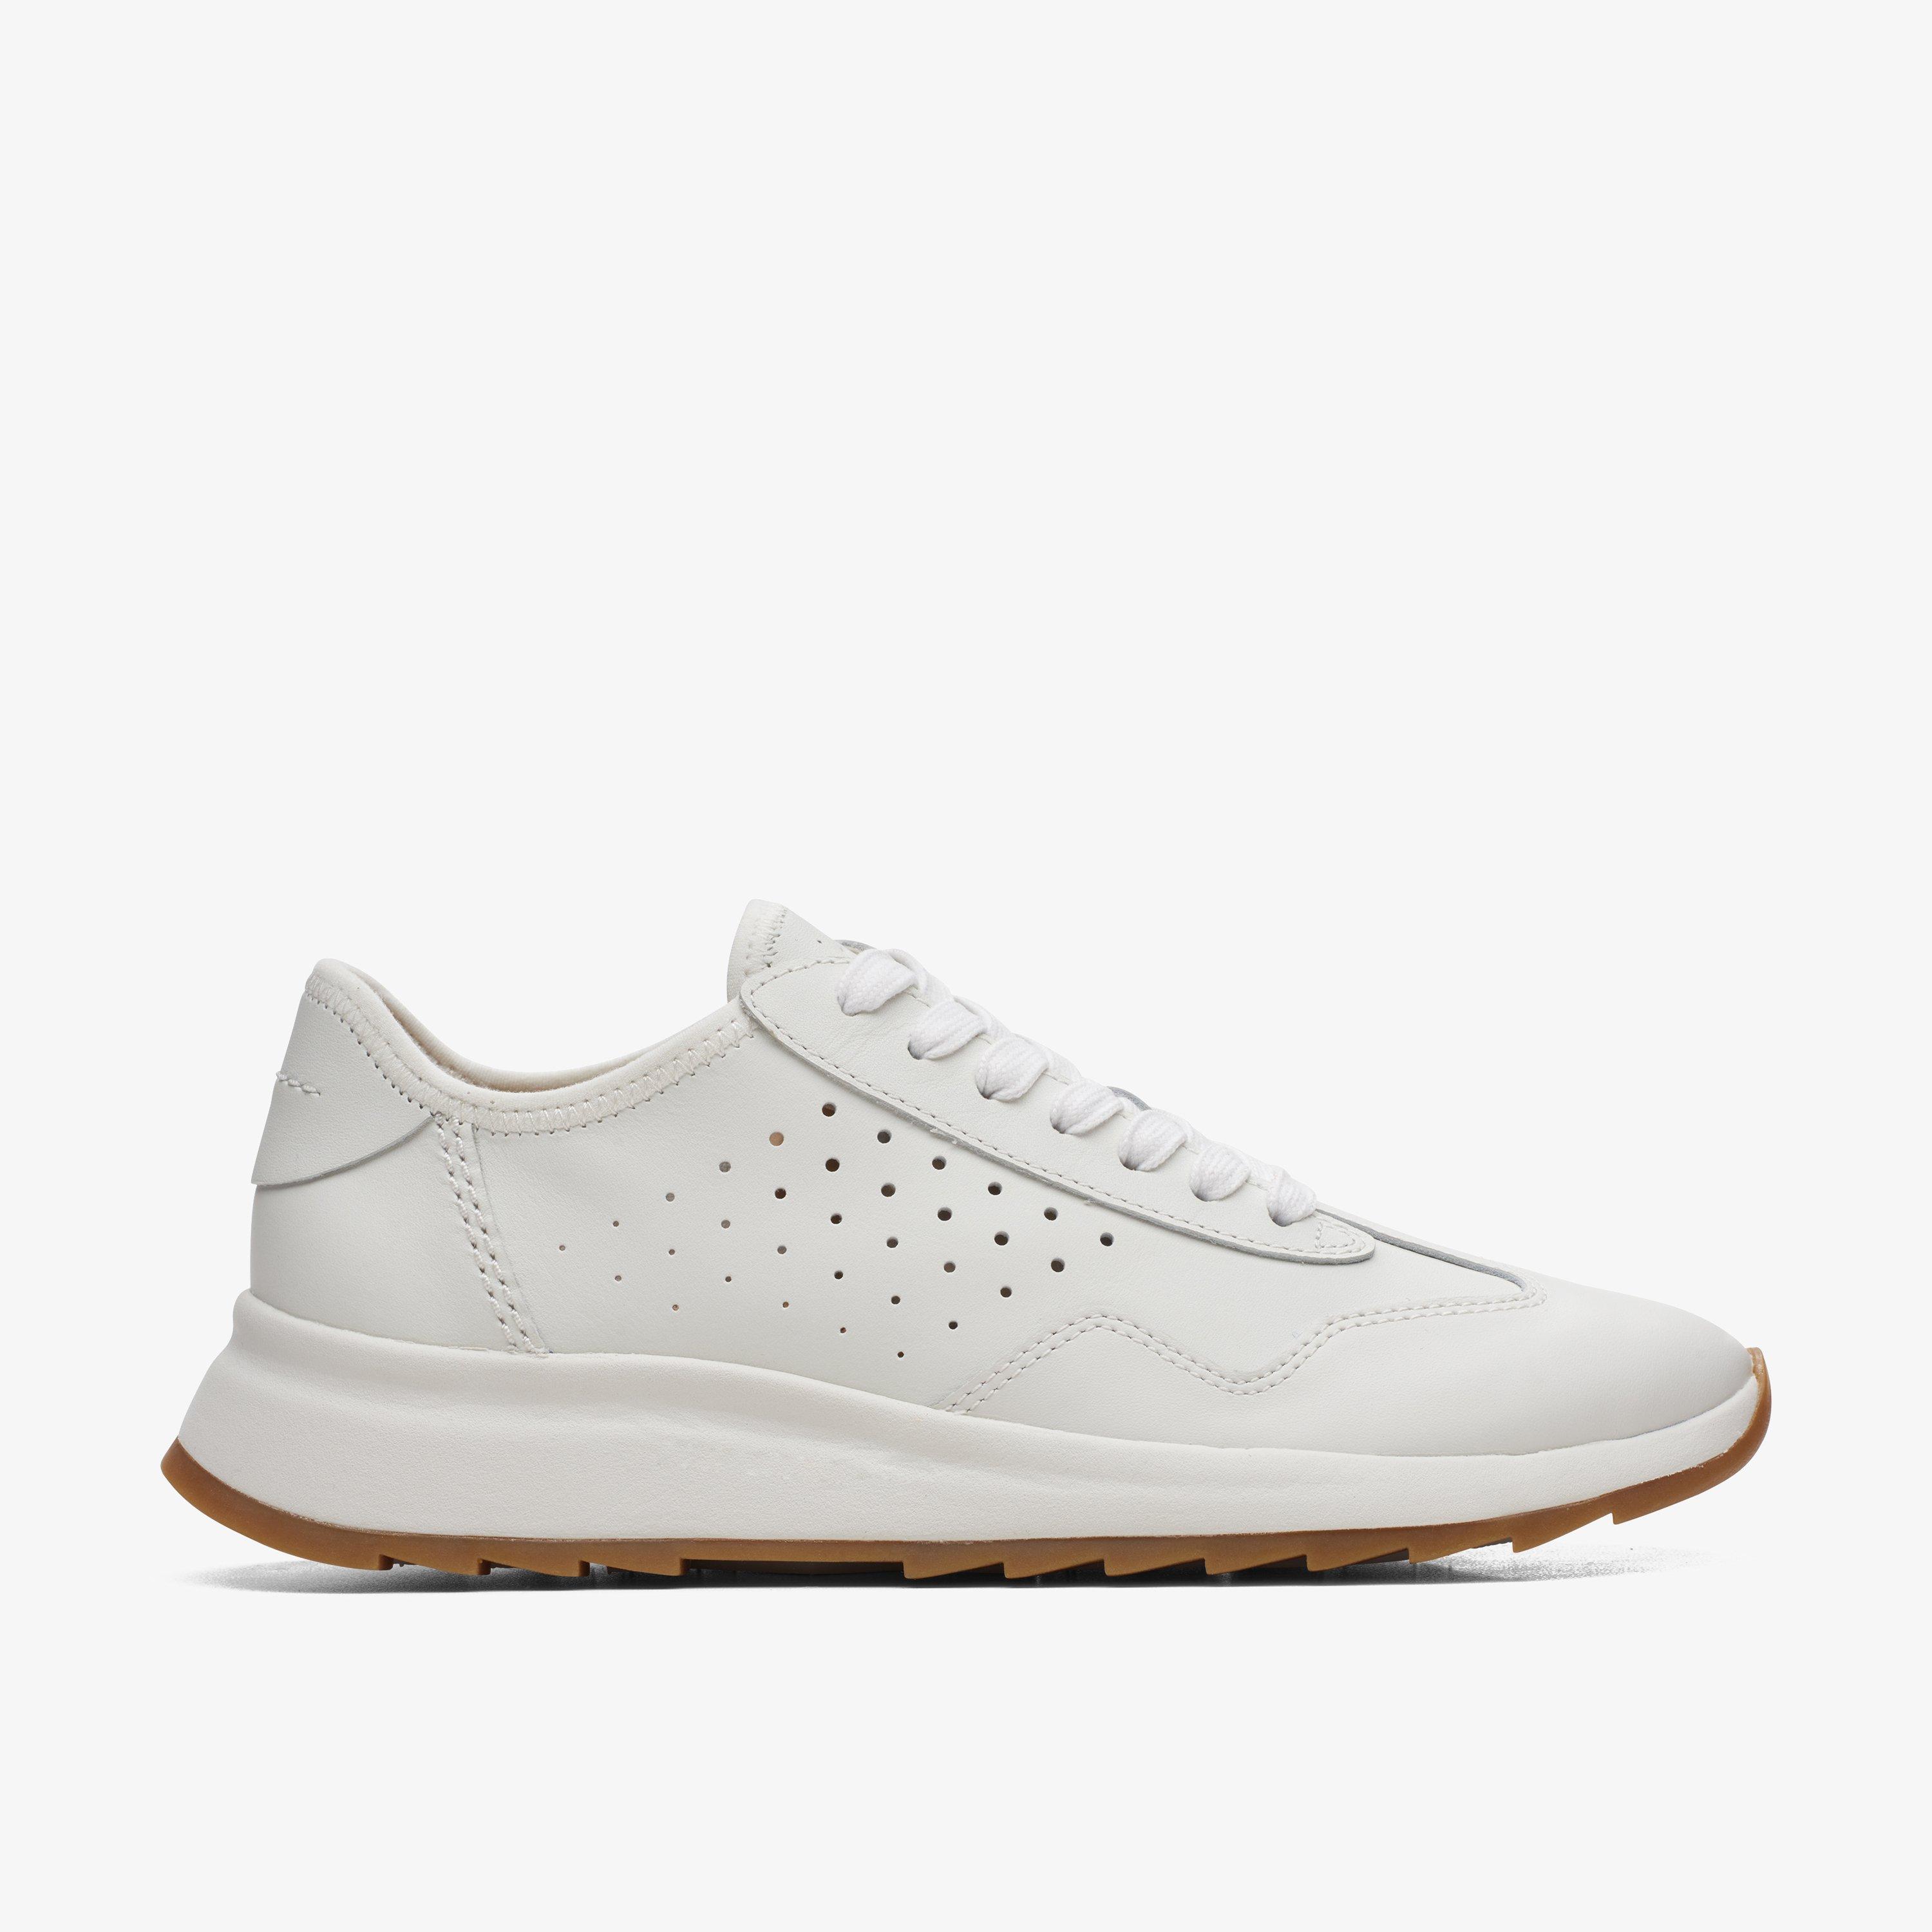 WOMENS DashLite Lace White Combination Leather Trainers | Clarks Outlet